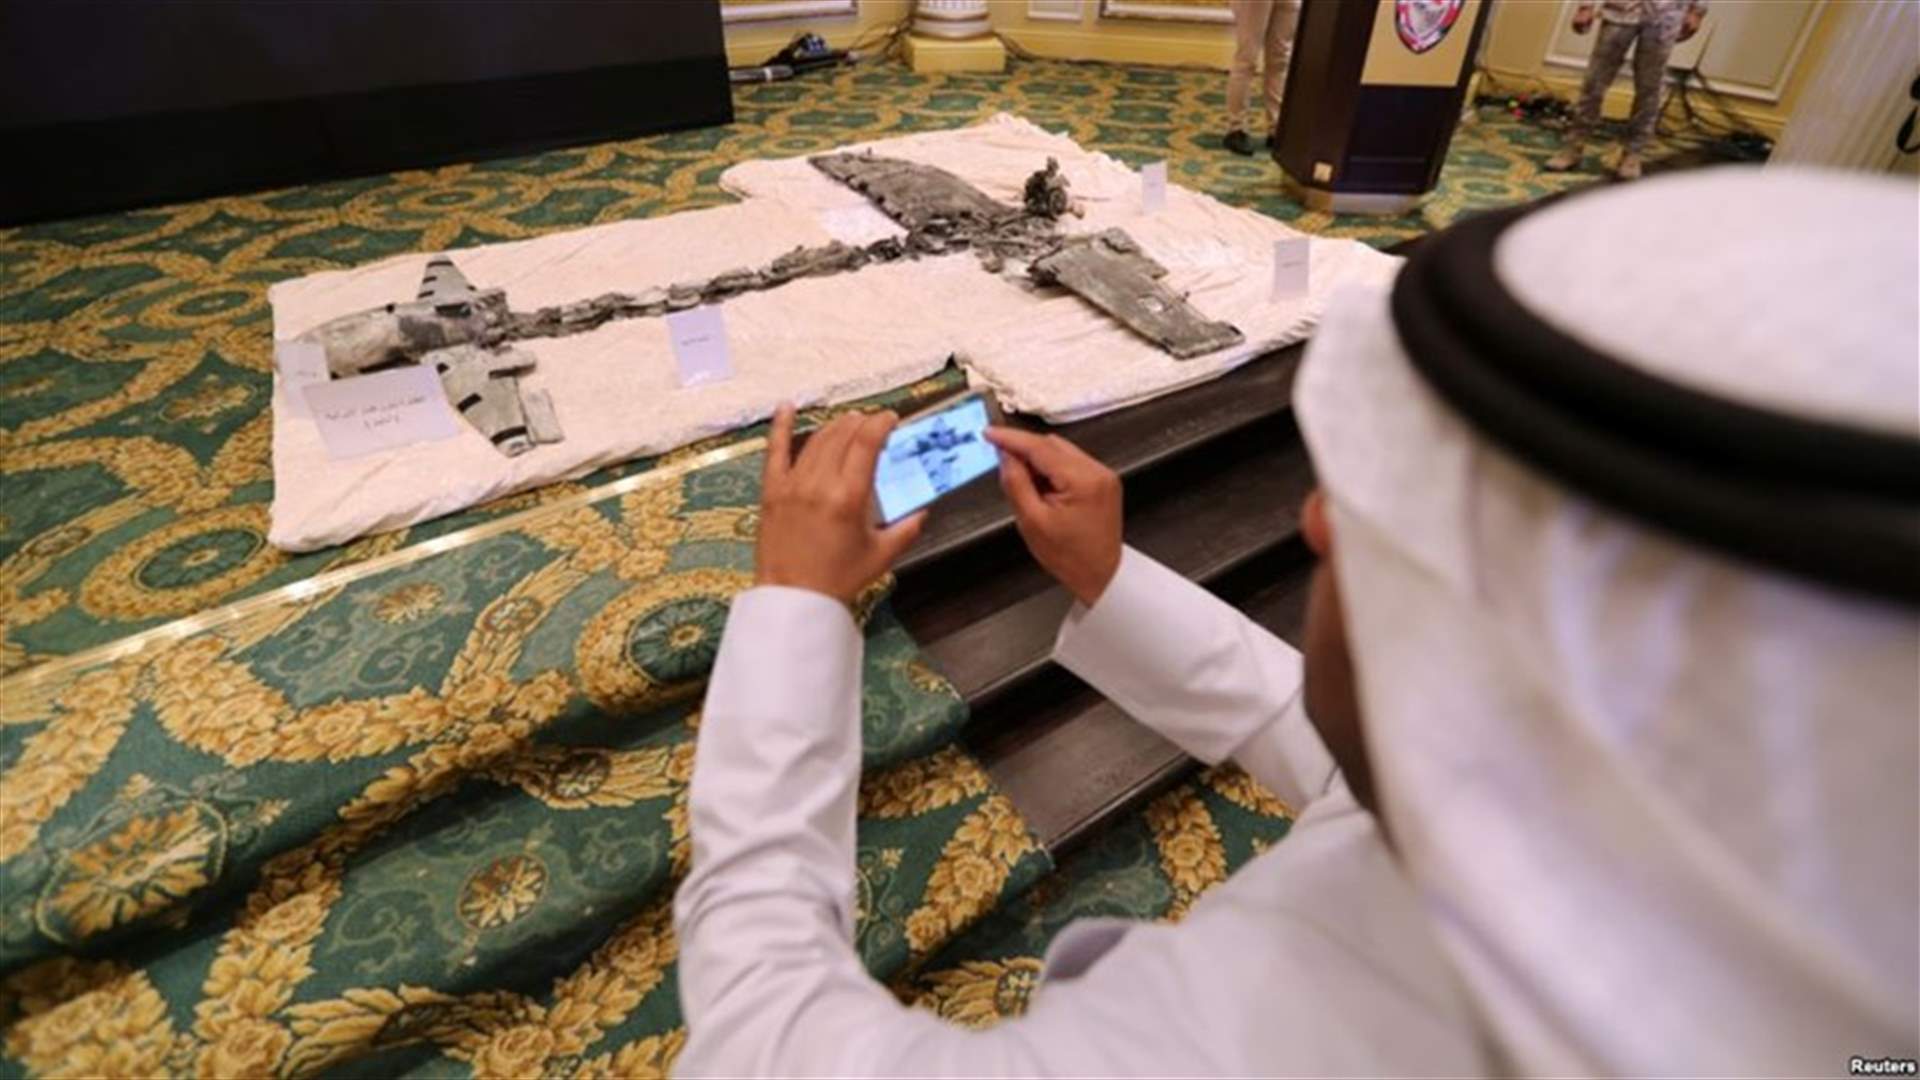 Saudi issues drone restrictions following palace incident